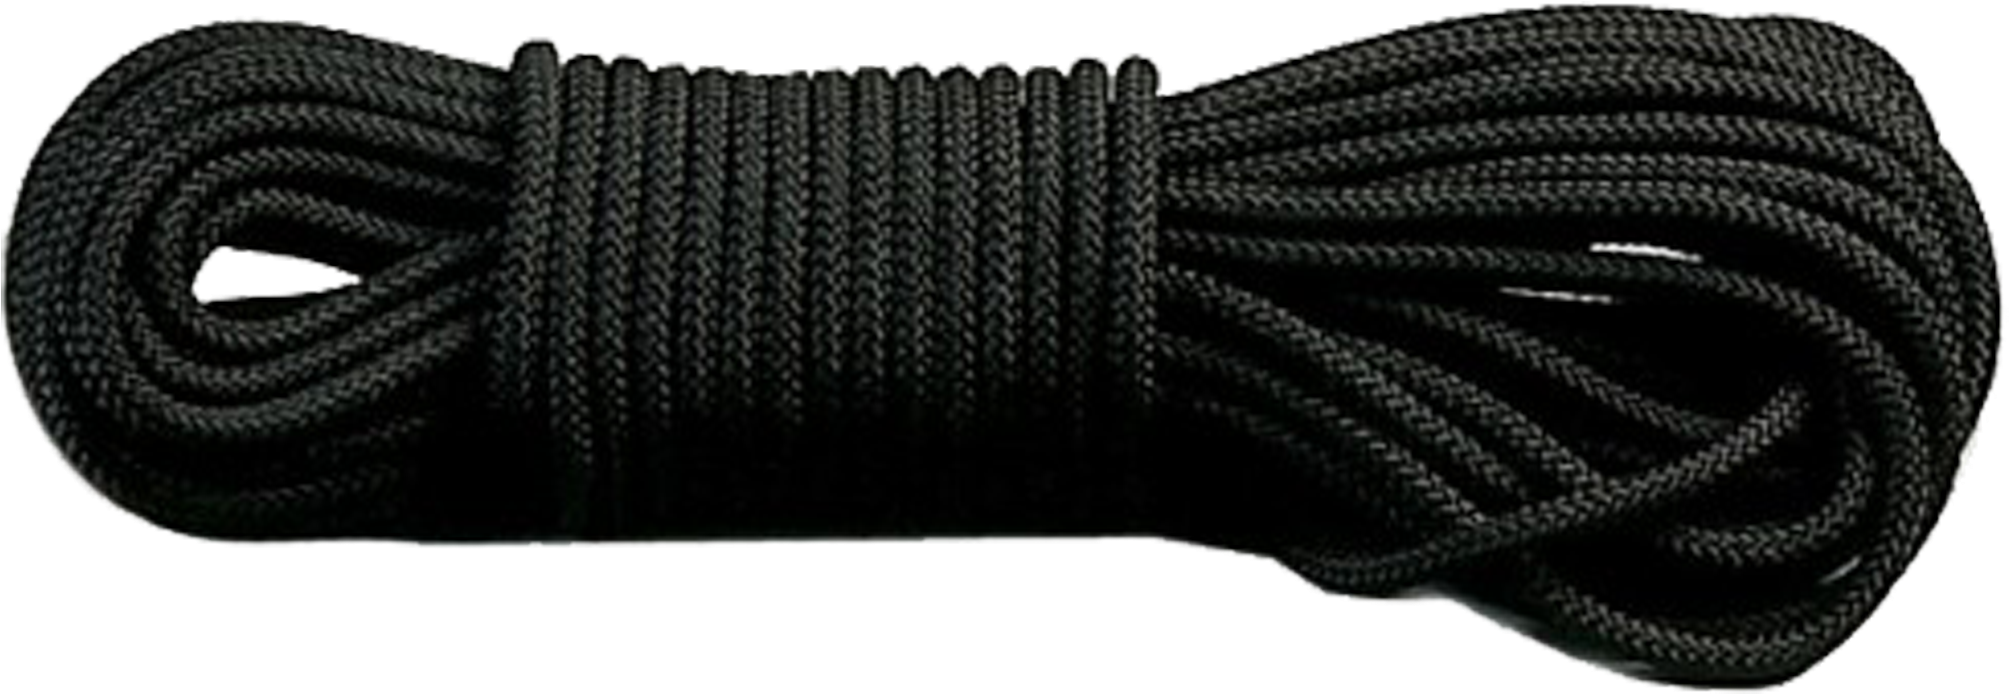 Download Black Nylon Rope PNG Image with No Background 